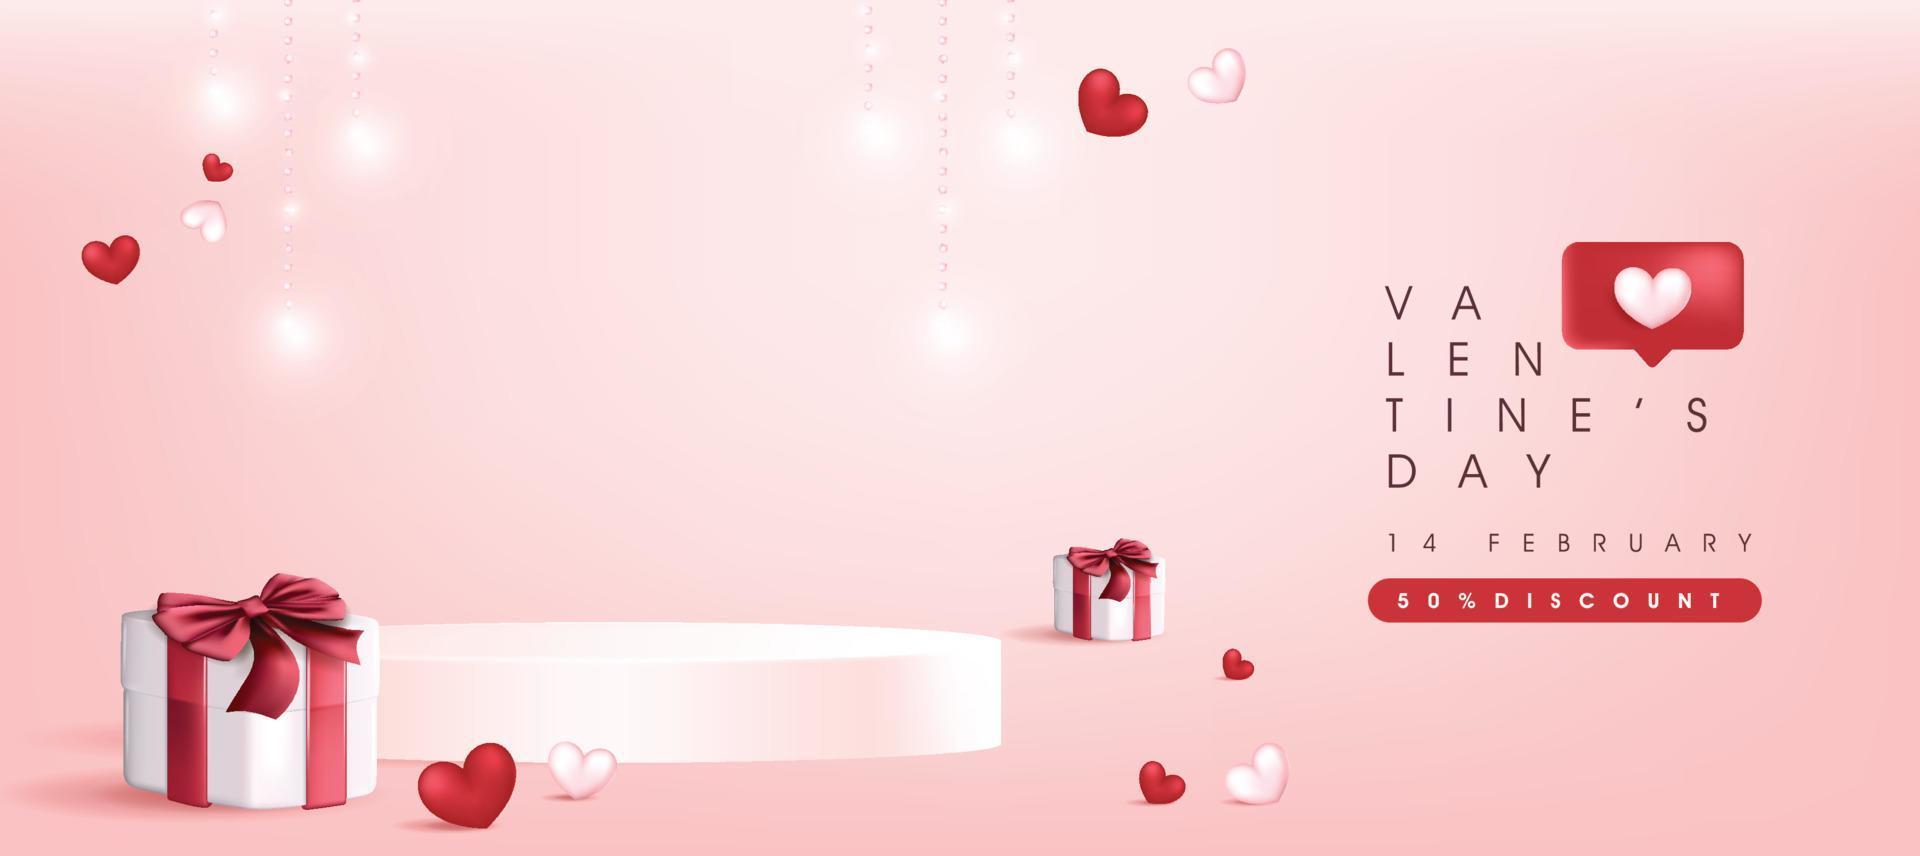 Valentine's day sale banner backgroud with product display cylindrical shape and gift box red bow vector